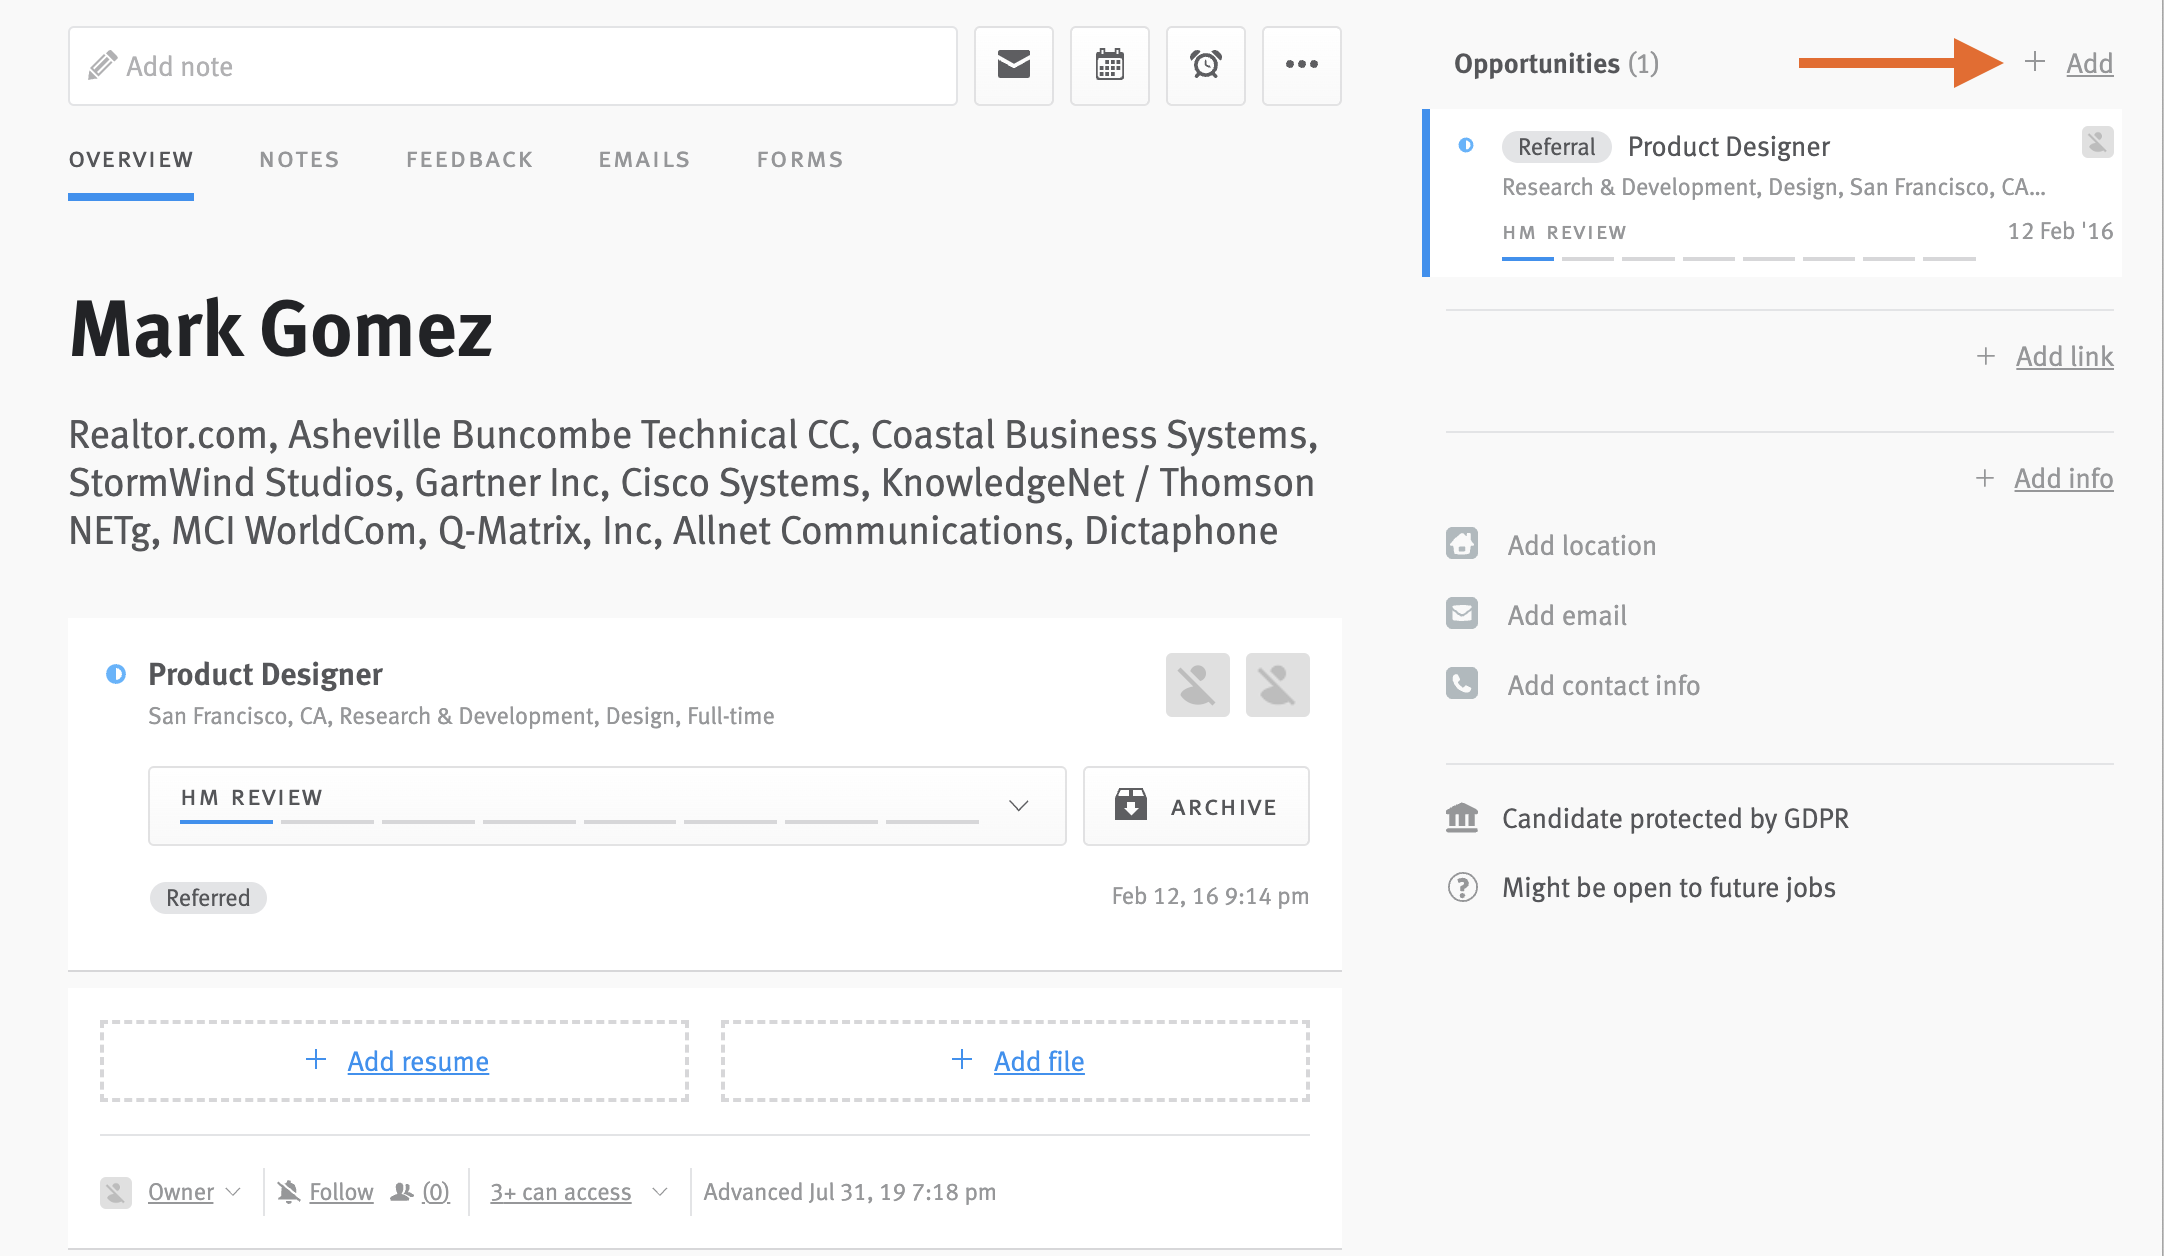 Candidate profile with arrow pointing to the add button in the opportunities section